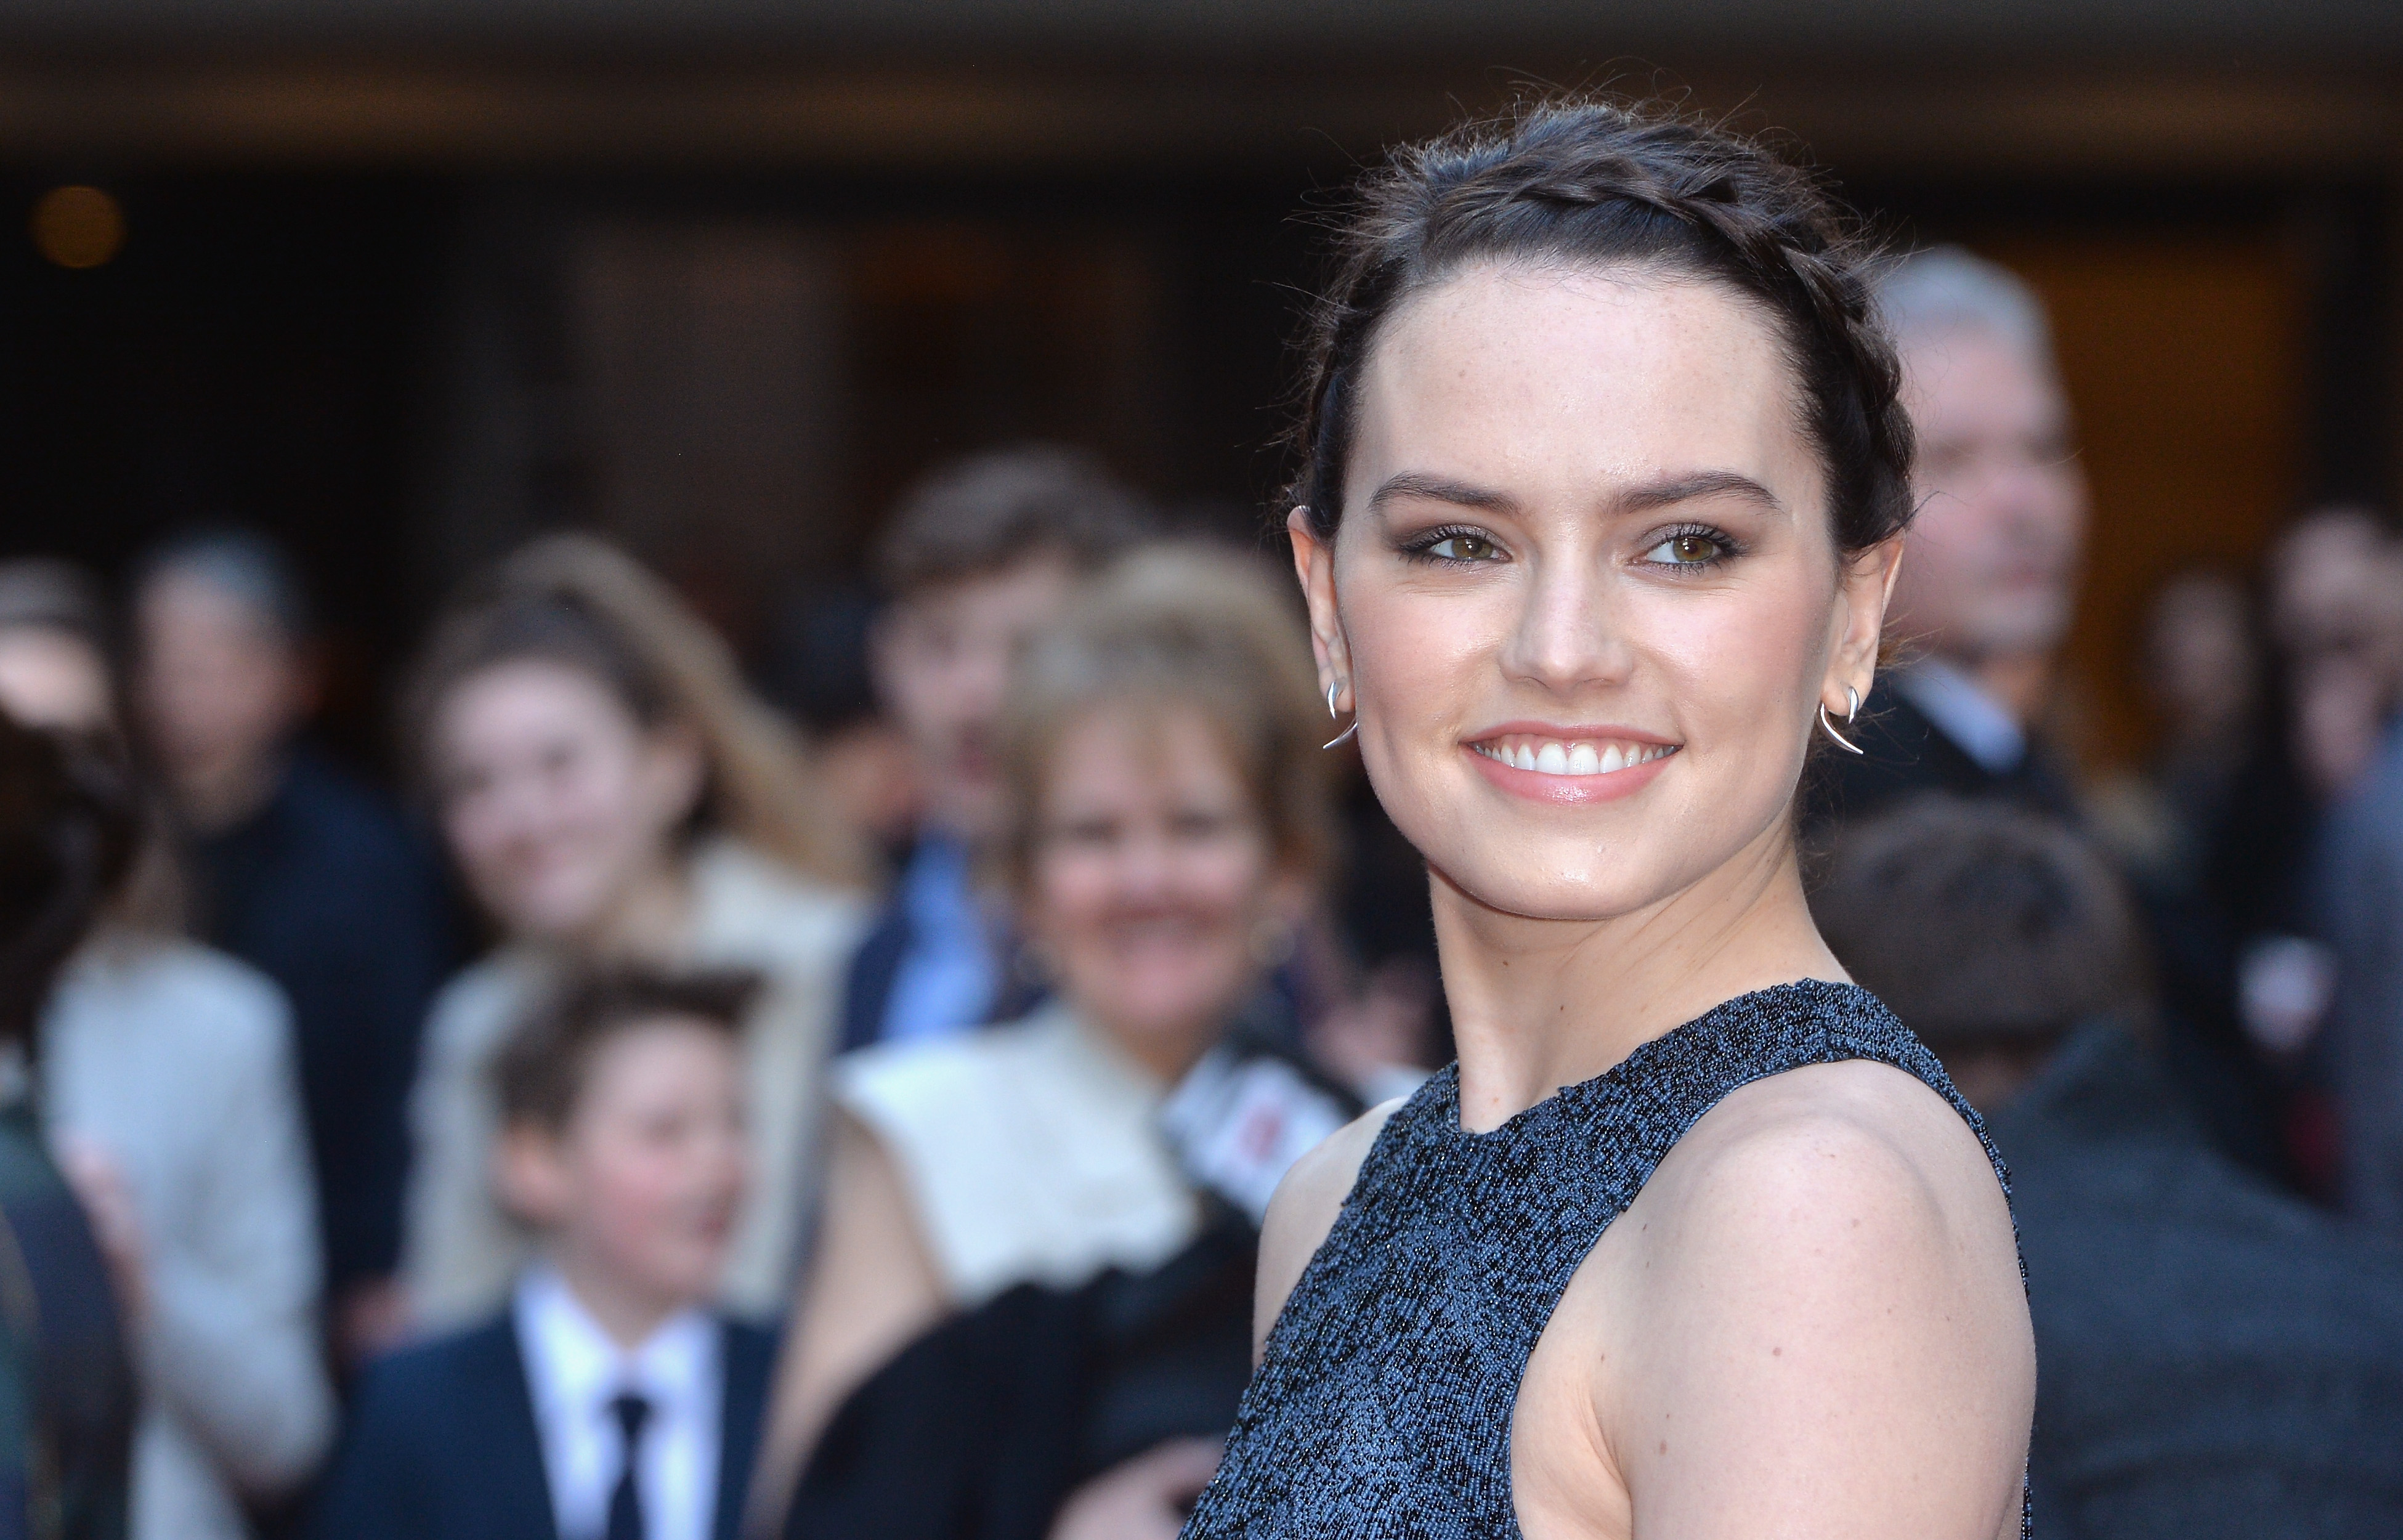 Daisy Ridley attends the Jameson Empire Awards in London, on March 20, 2016. (Anthony Harvey—Getty Images)